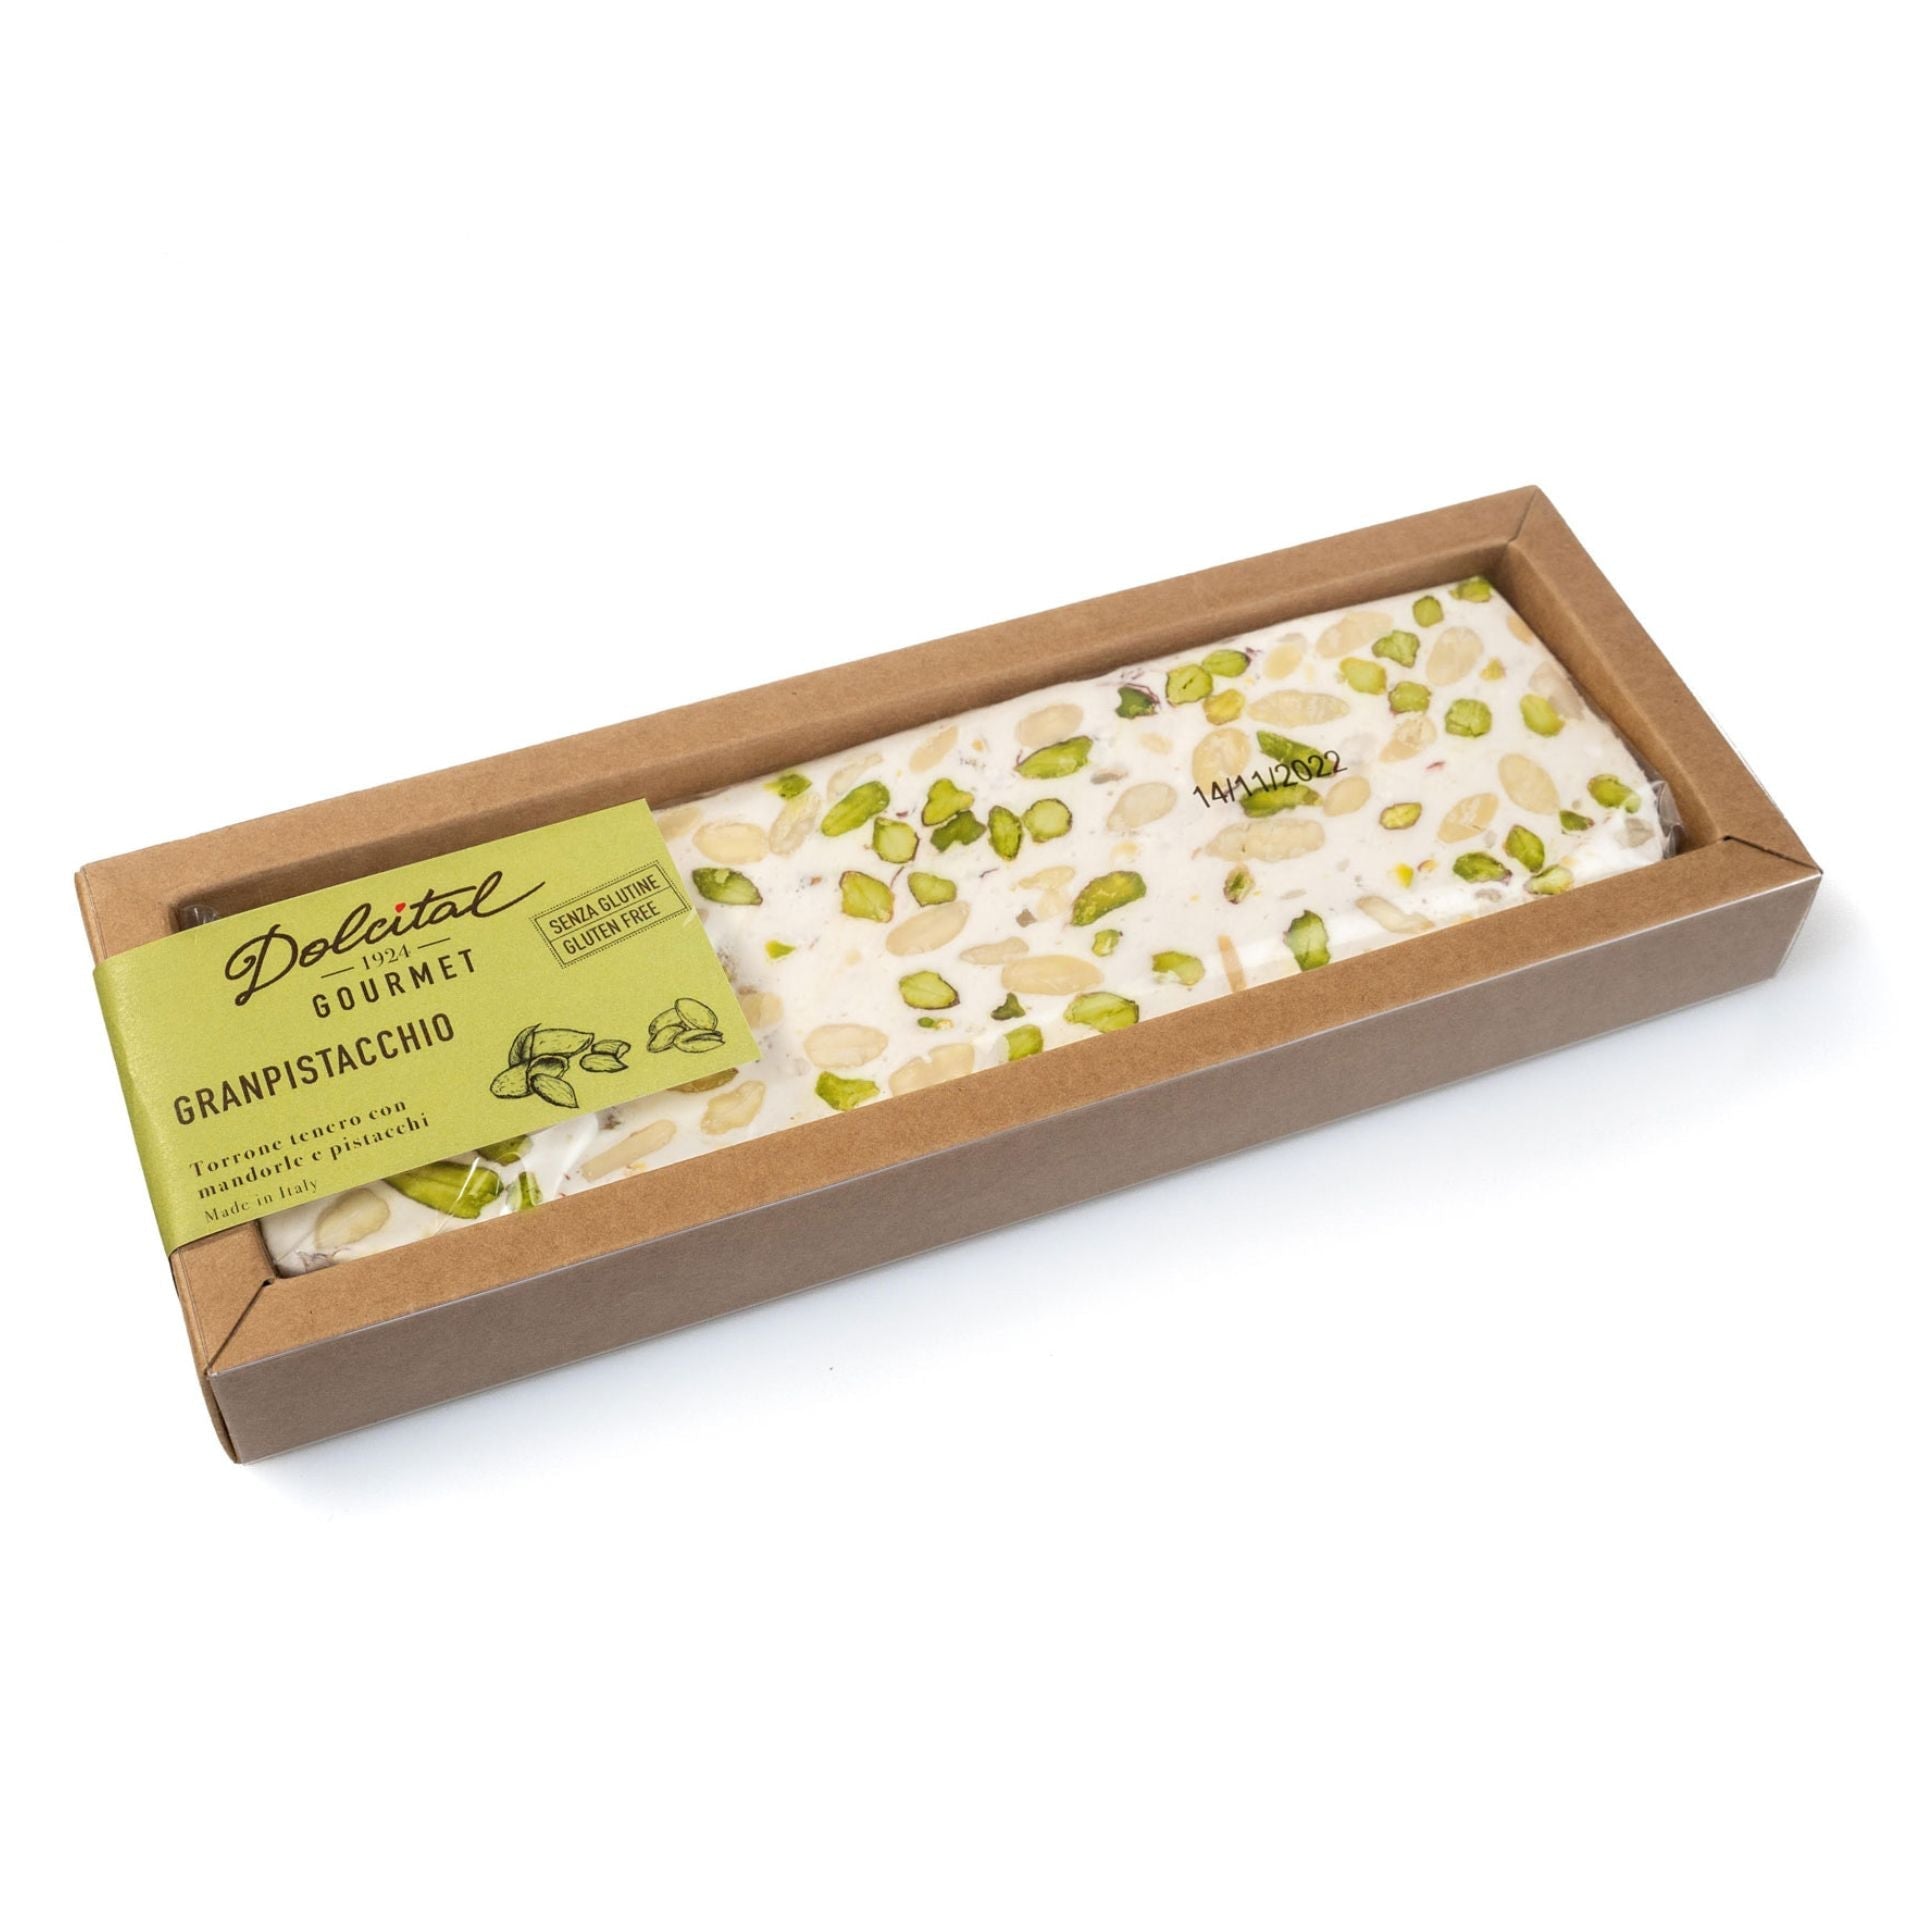 Dolcital Gourmet Soft Nougat with Pistachio 180g  | Imported and distributed in the UK by Just Gourmet Foods